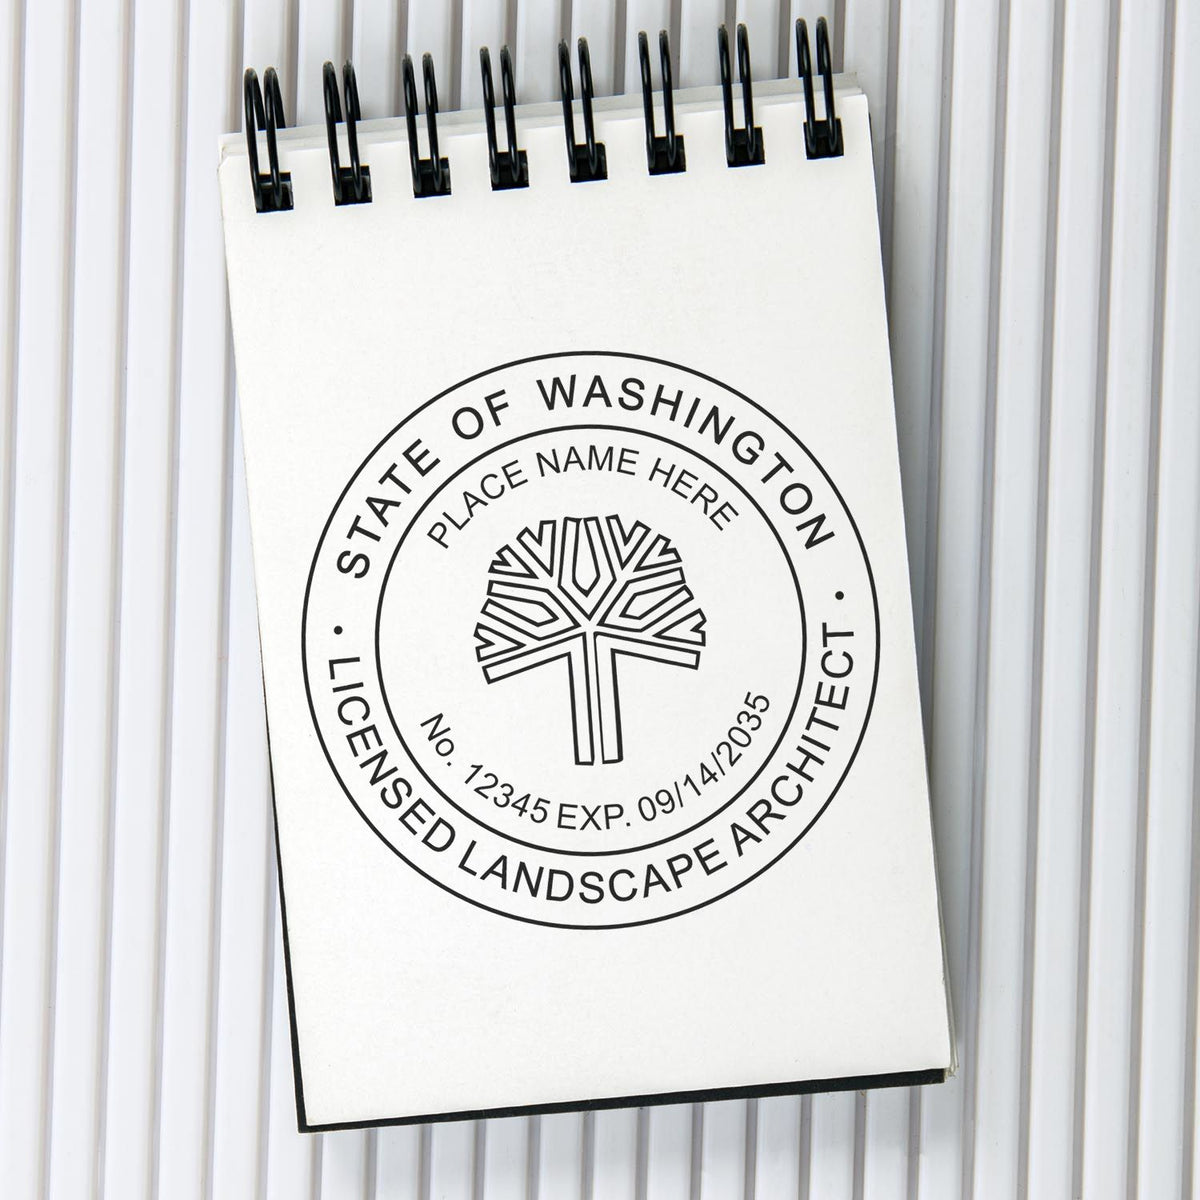 A lifestyle photo showing a stamped image of the Digital Washington Landscape Architect Stamp on a piece of paper